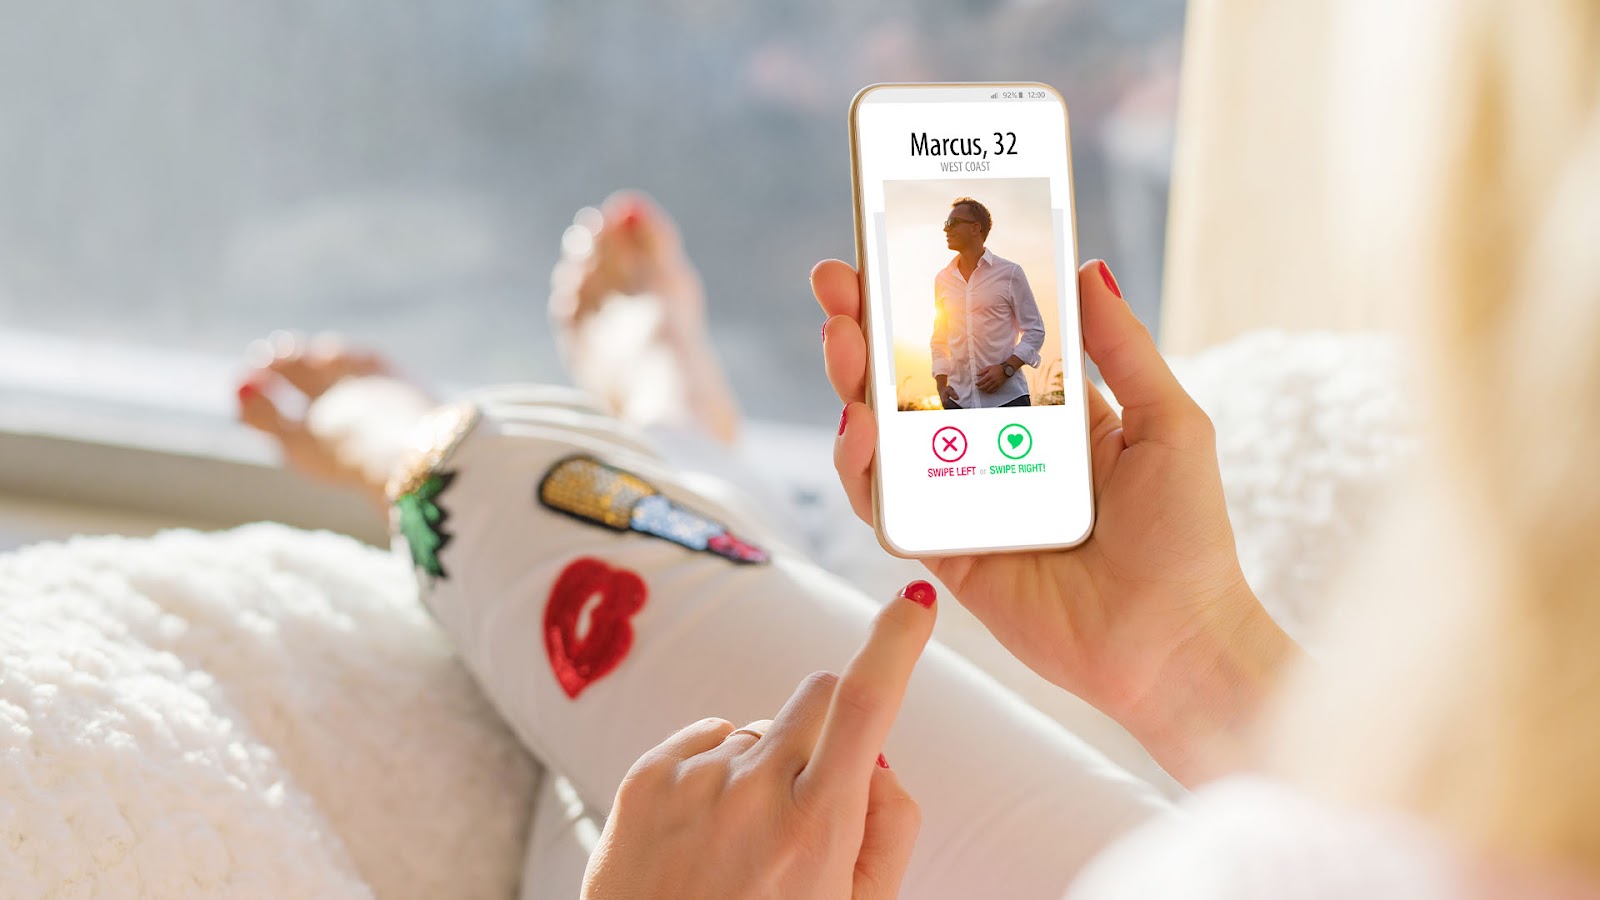 Blonde woman in pyjamas lying on a pillow holding her phone which shows the the dating profile of a man